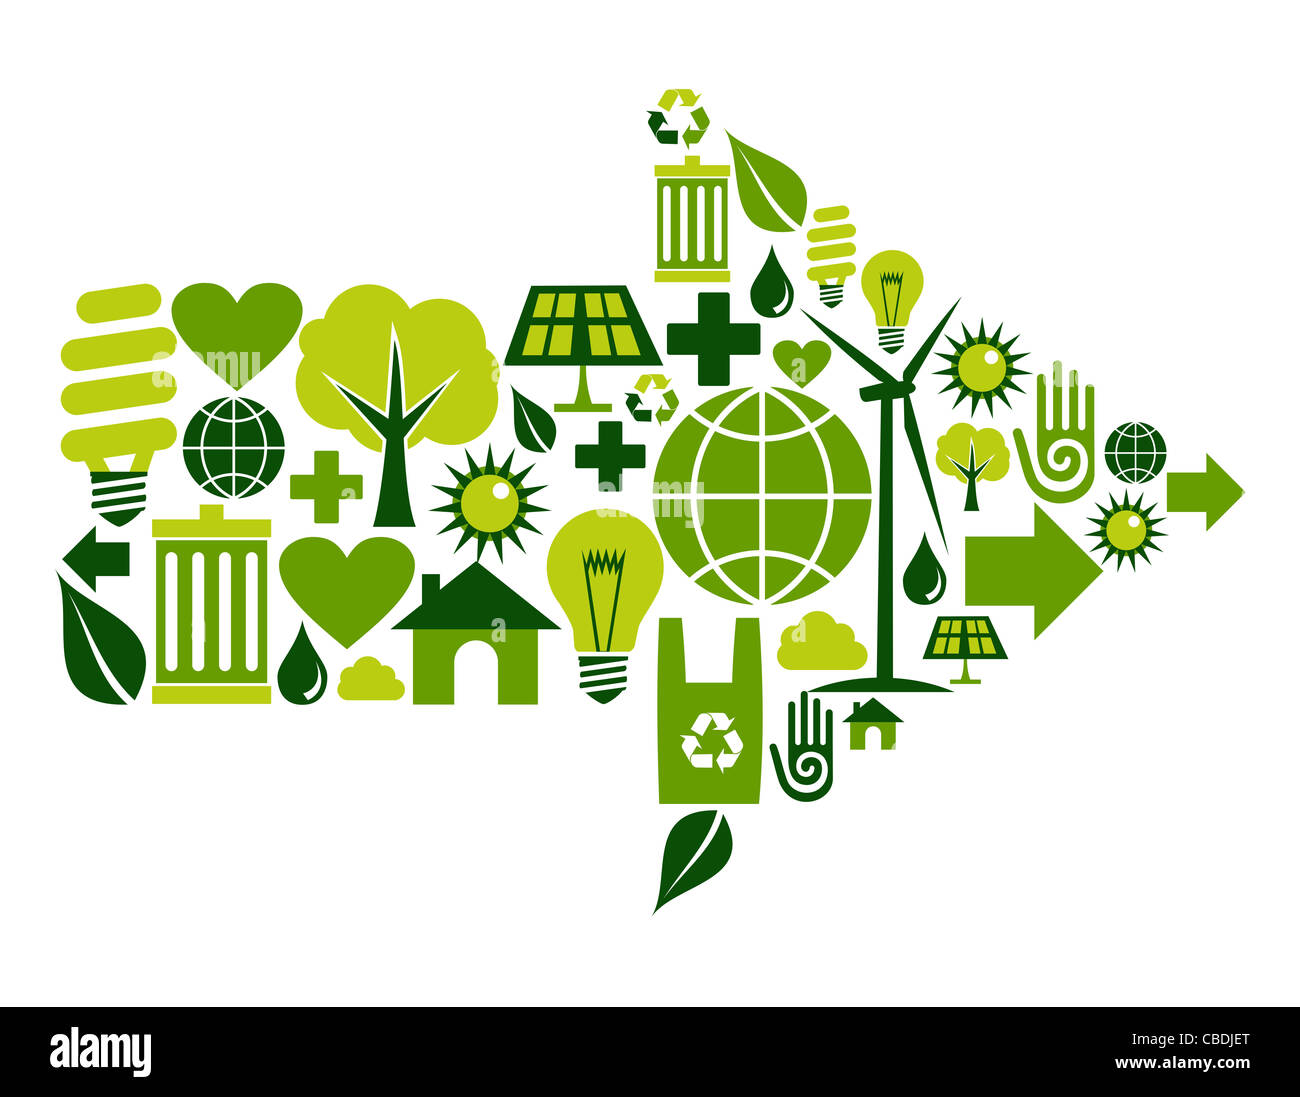 Arrow symbol made with green environment icons set. Stock Photo